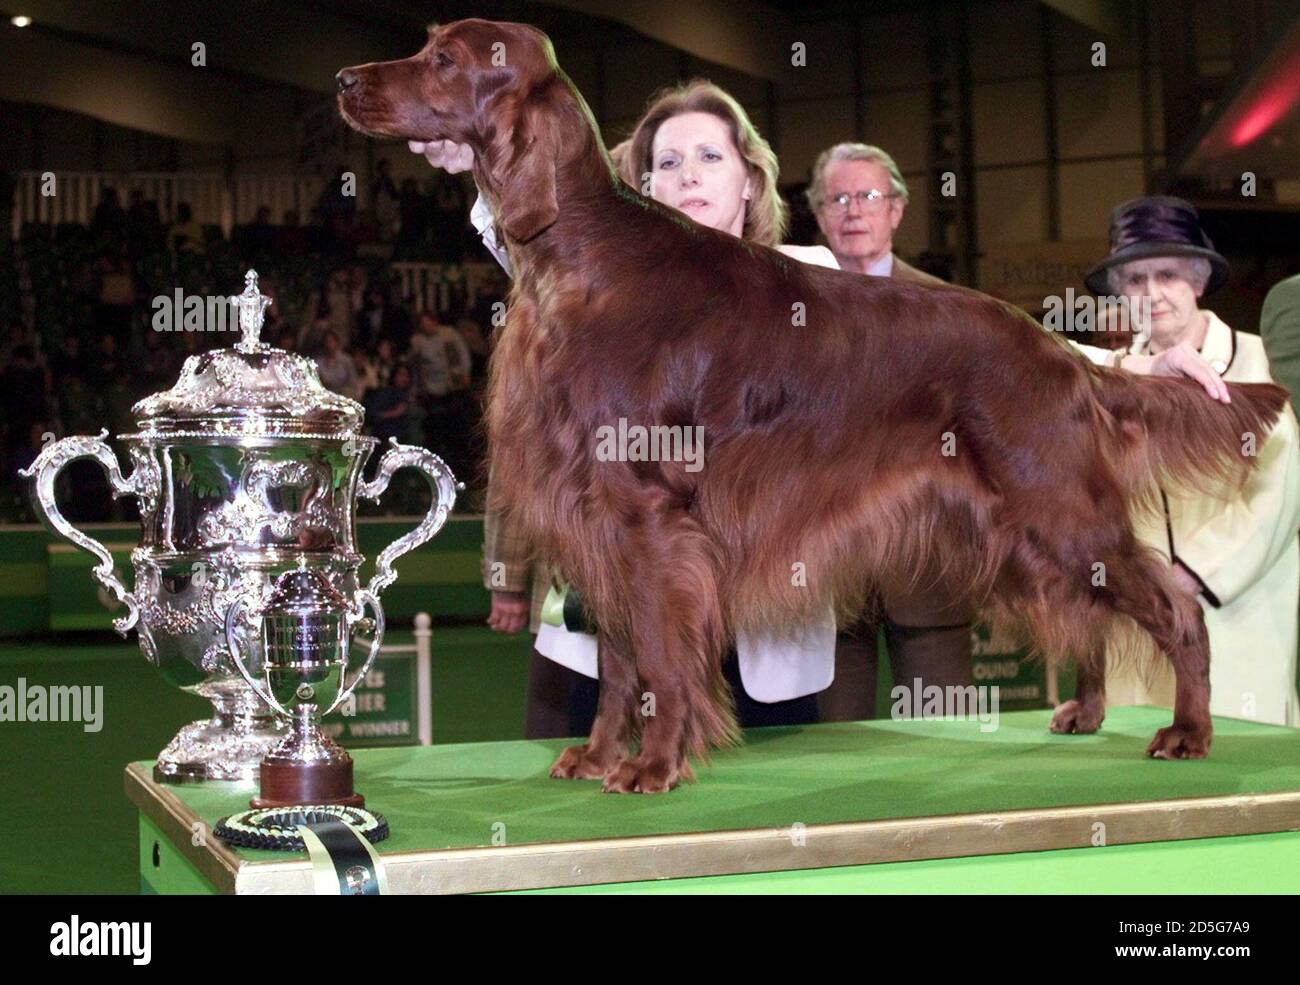 Best in show winner Irish Setter, Caspians Intrepid owned by Jackie Lorrimer poses at Crufts Dog show at the NEC Birmingham March 14. Crufts which is the largest dog show in the world attracted around 26,000 dogs over 4 days.  IH/KC Stock Photo